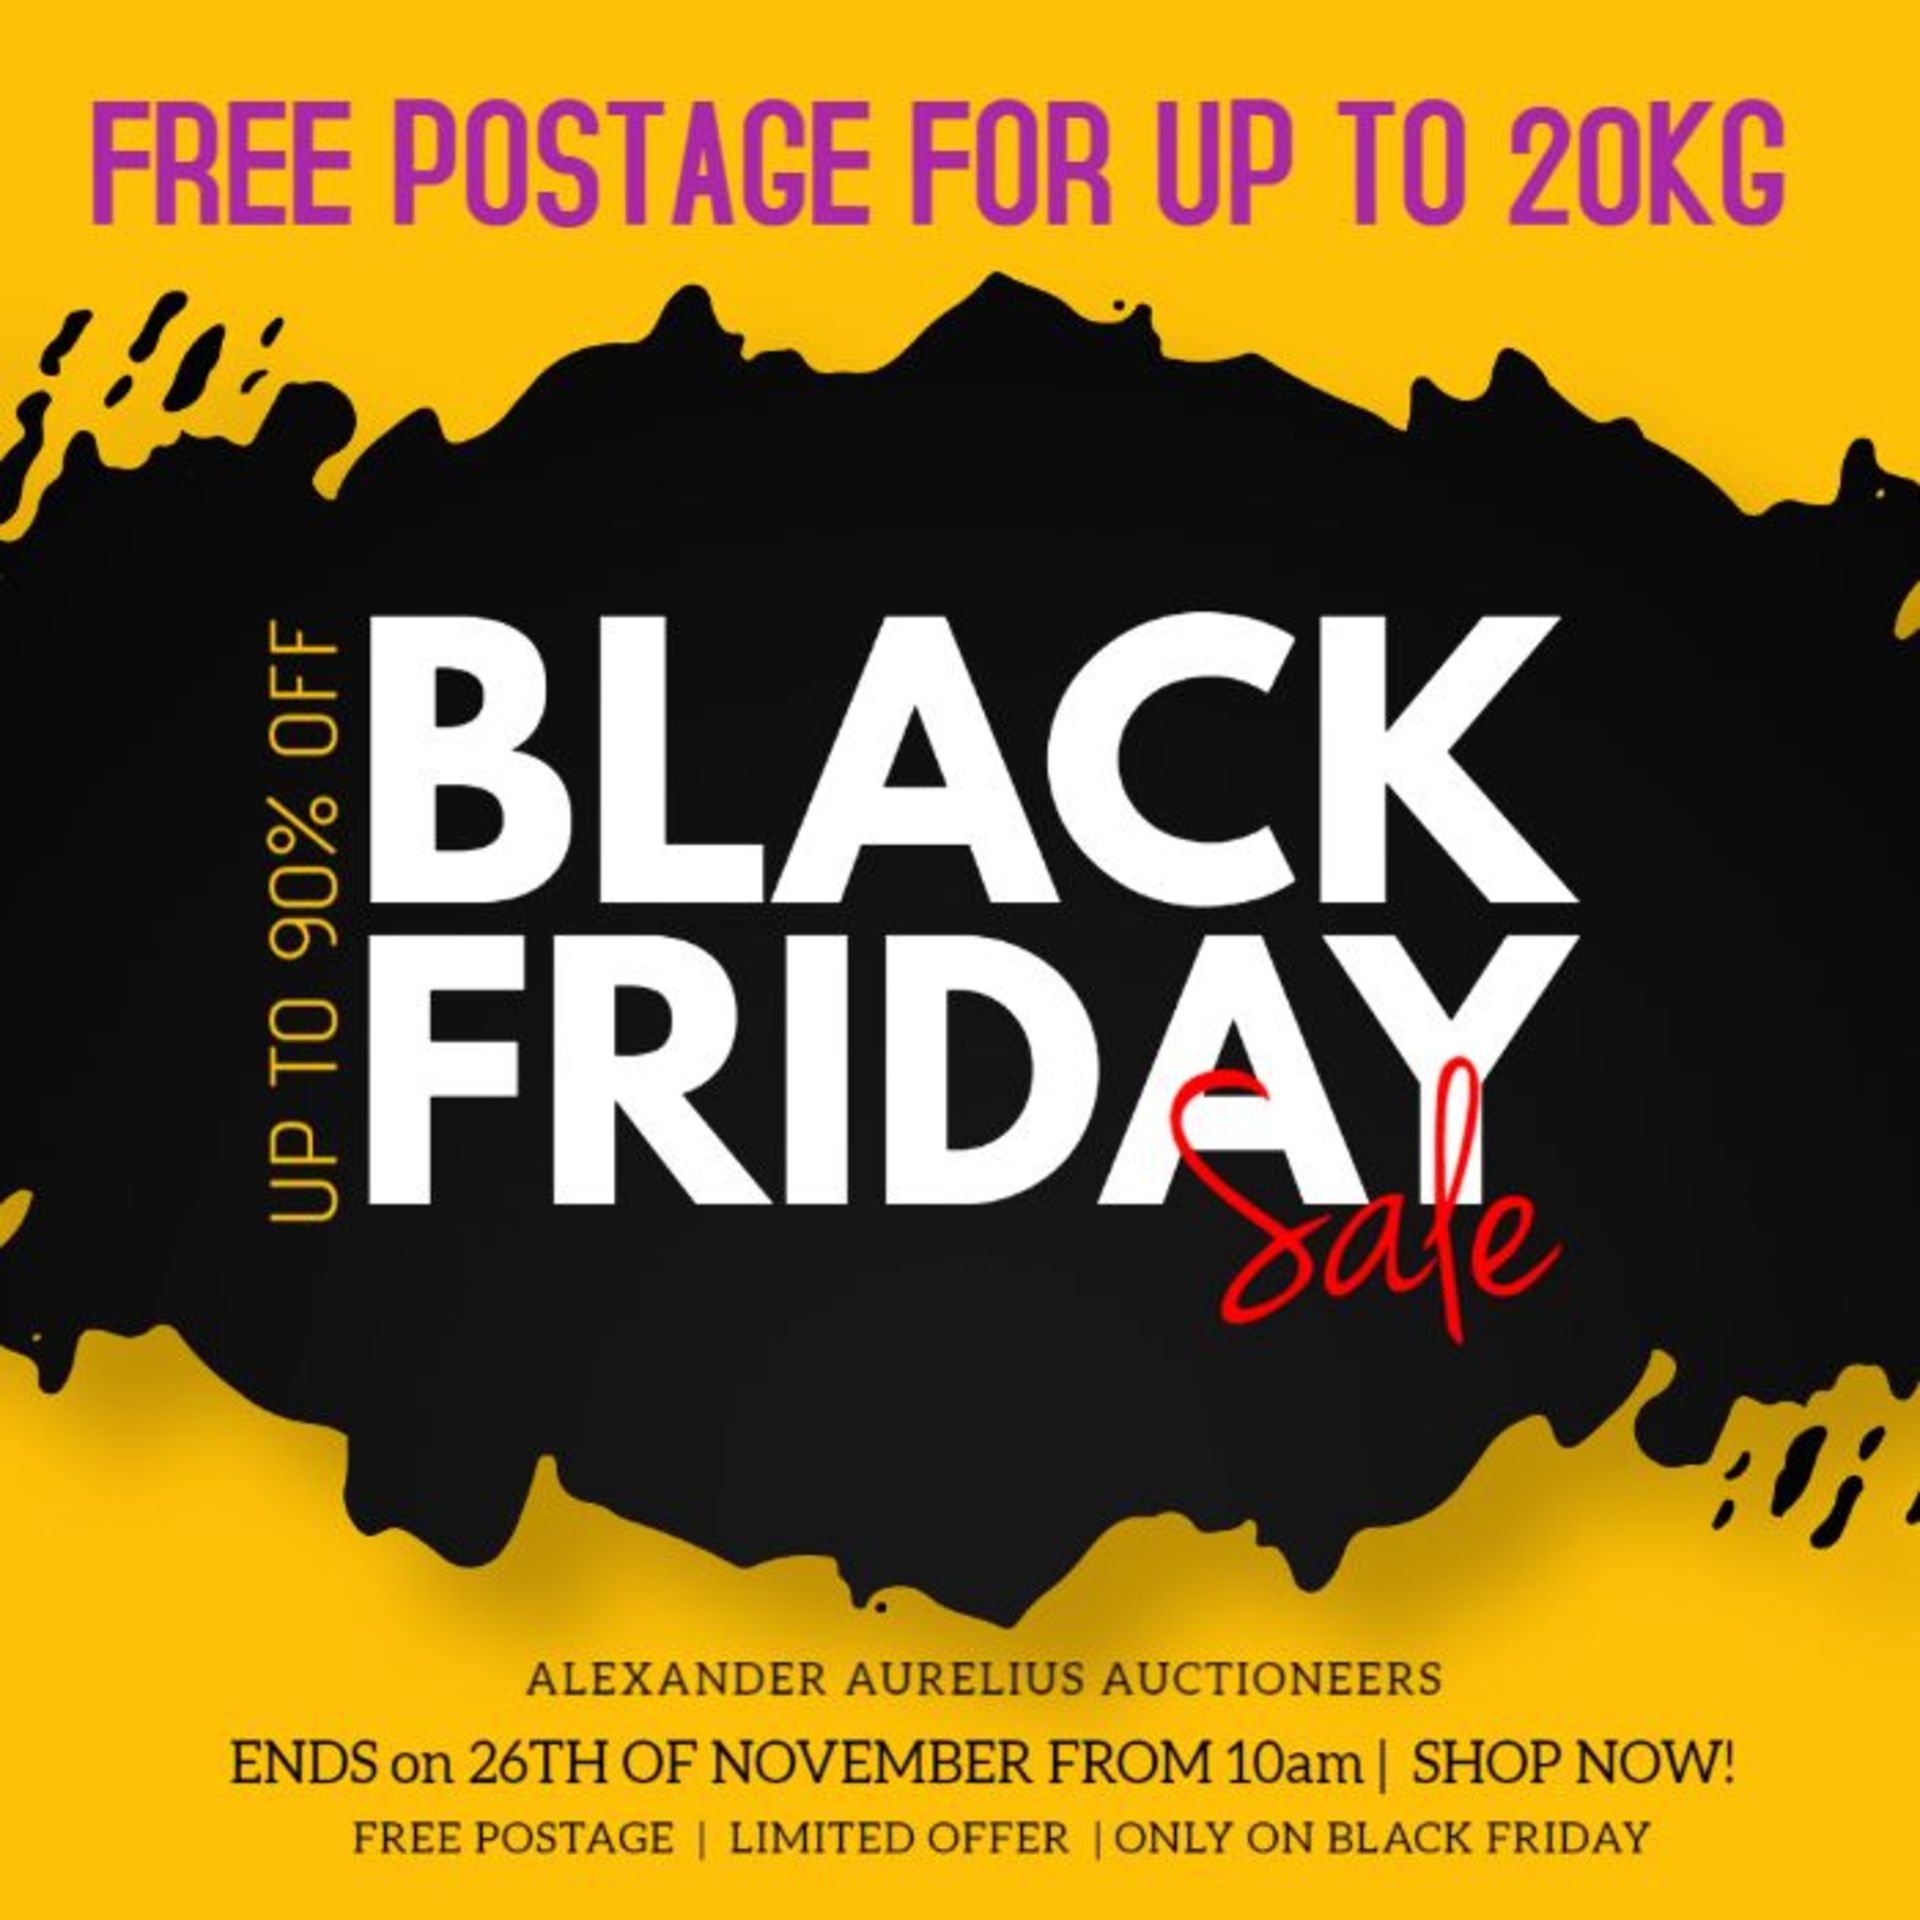 BLACK FRIDAY DEALS | FREE POSTAGE FOR UP TO 20KG | AUCTION ENDS ON FRIDAY 26TH OF NOV FROM 10 AM